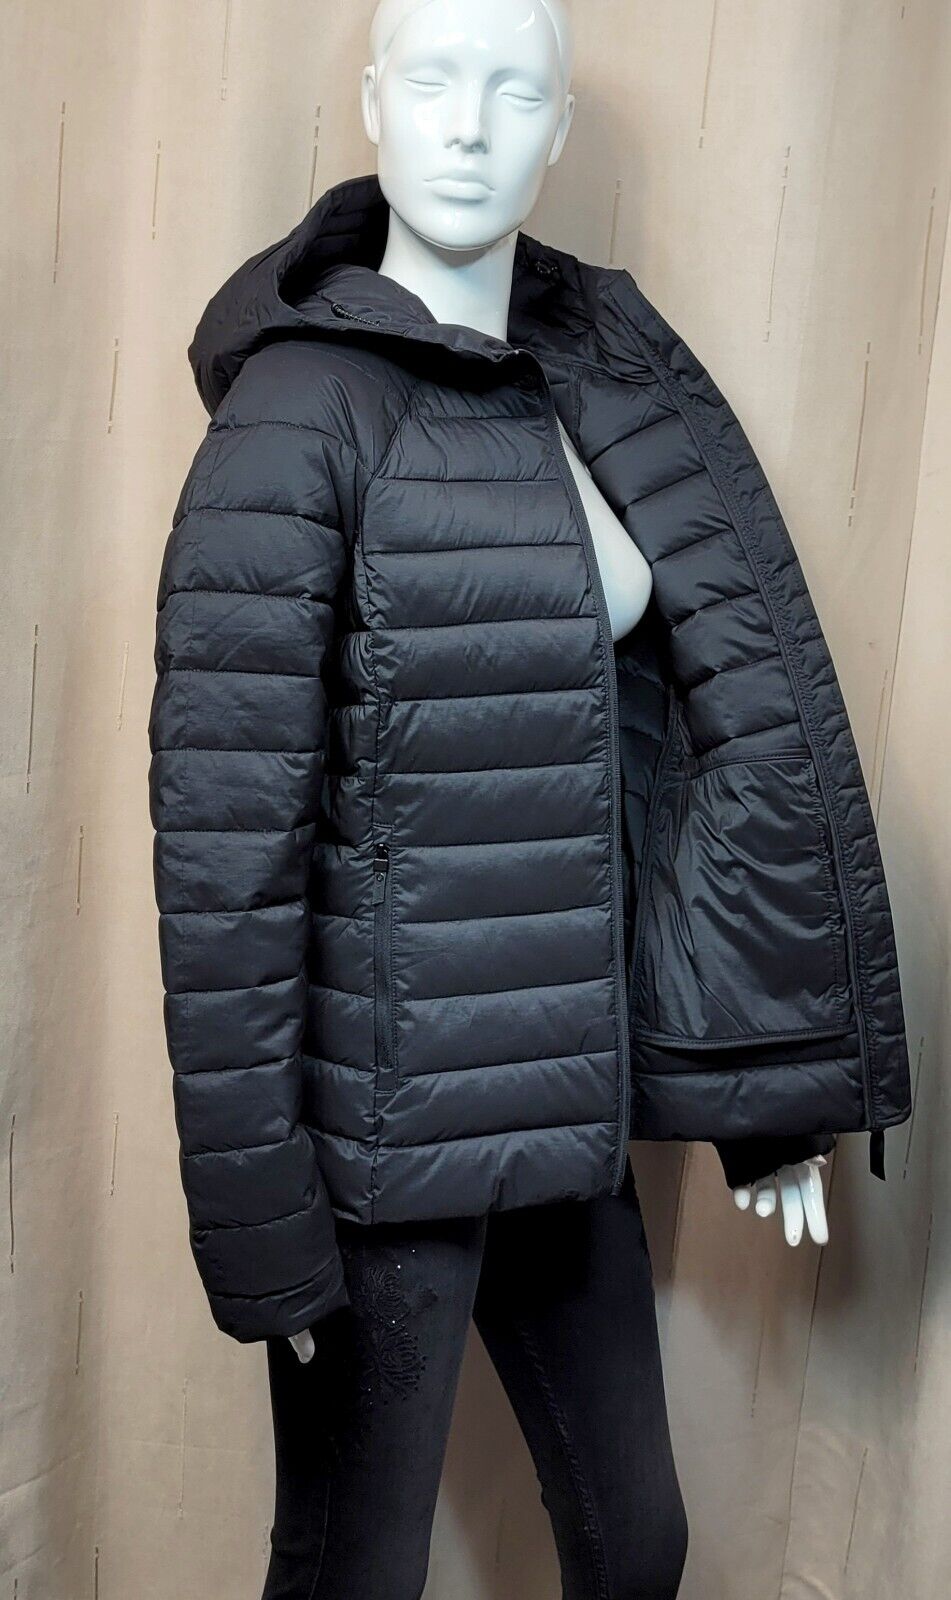 M&S GOODMOVE Stormwear QUILTED Hooded JACKET ~ Size 14 ~ BLACK | eBay